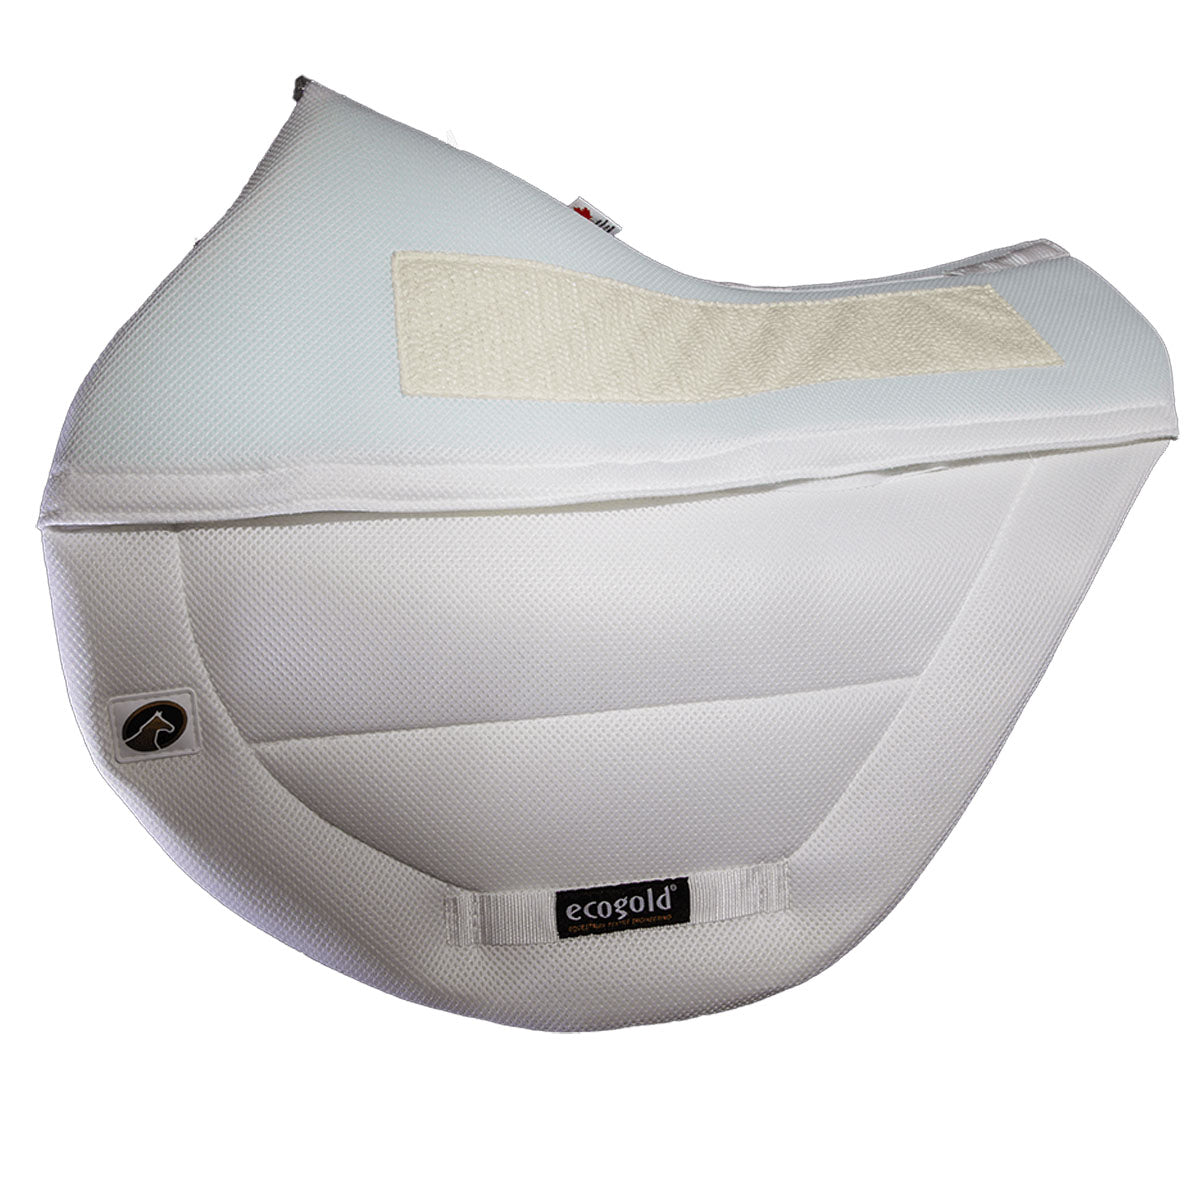 EcoGold Coolfit Cross Country Saddle Pad